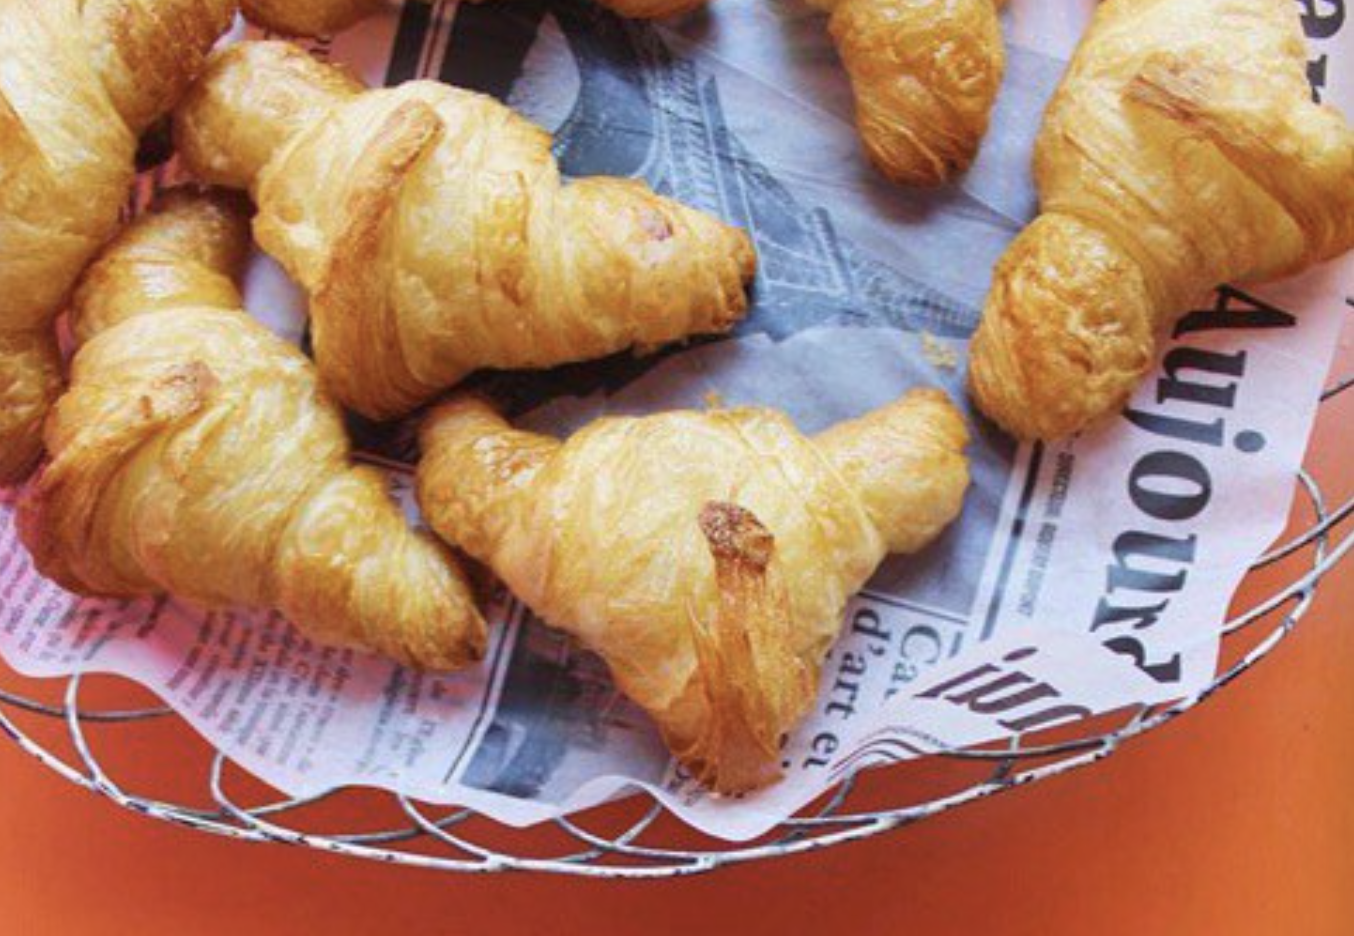 Photo of mini croissants in a basket